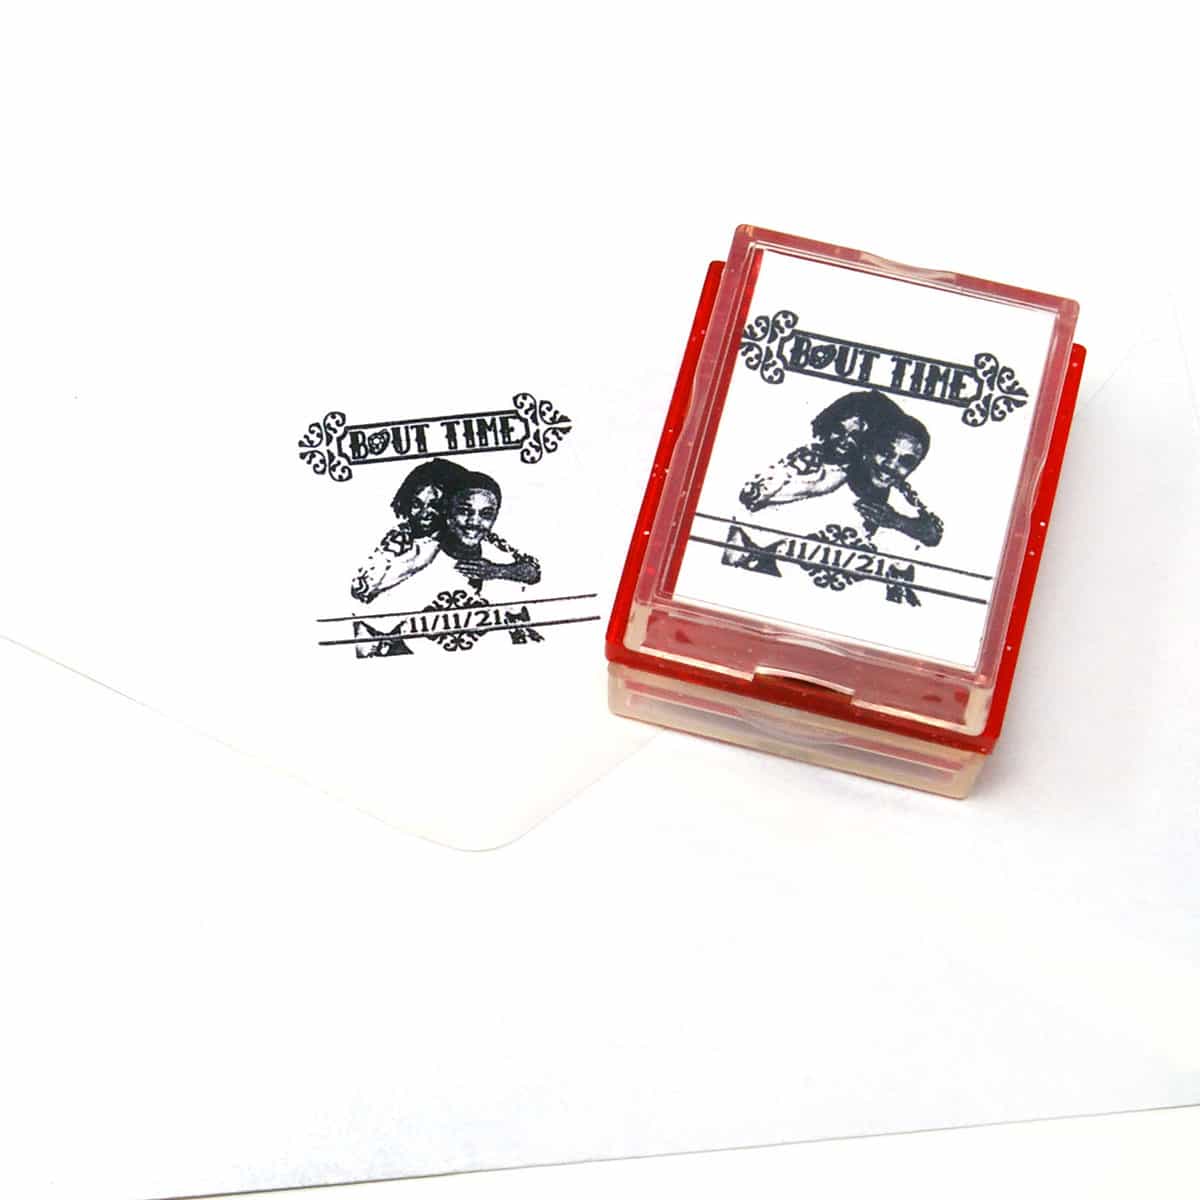 bout time wedding rubber stamp